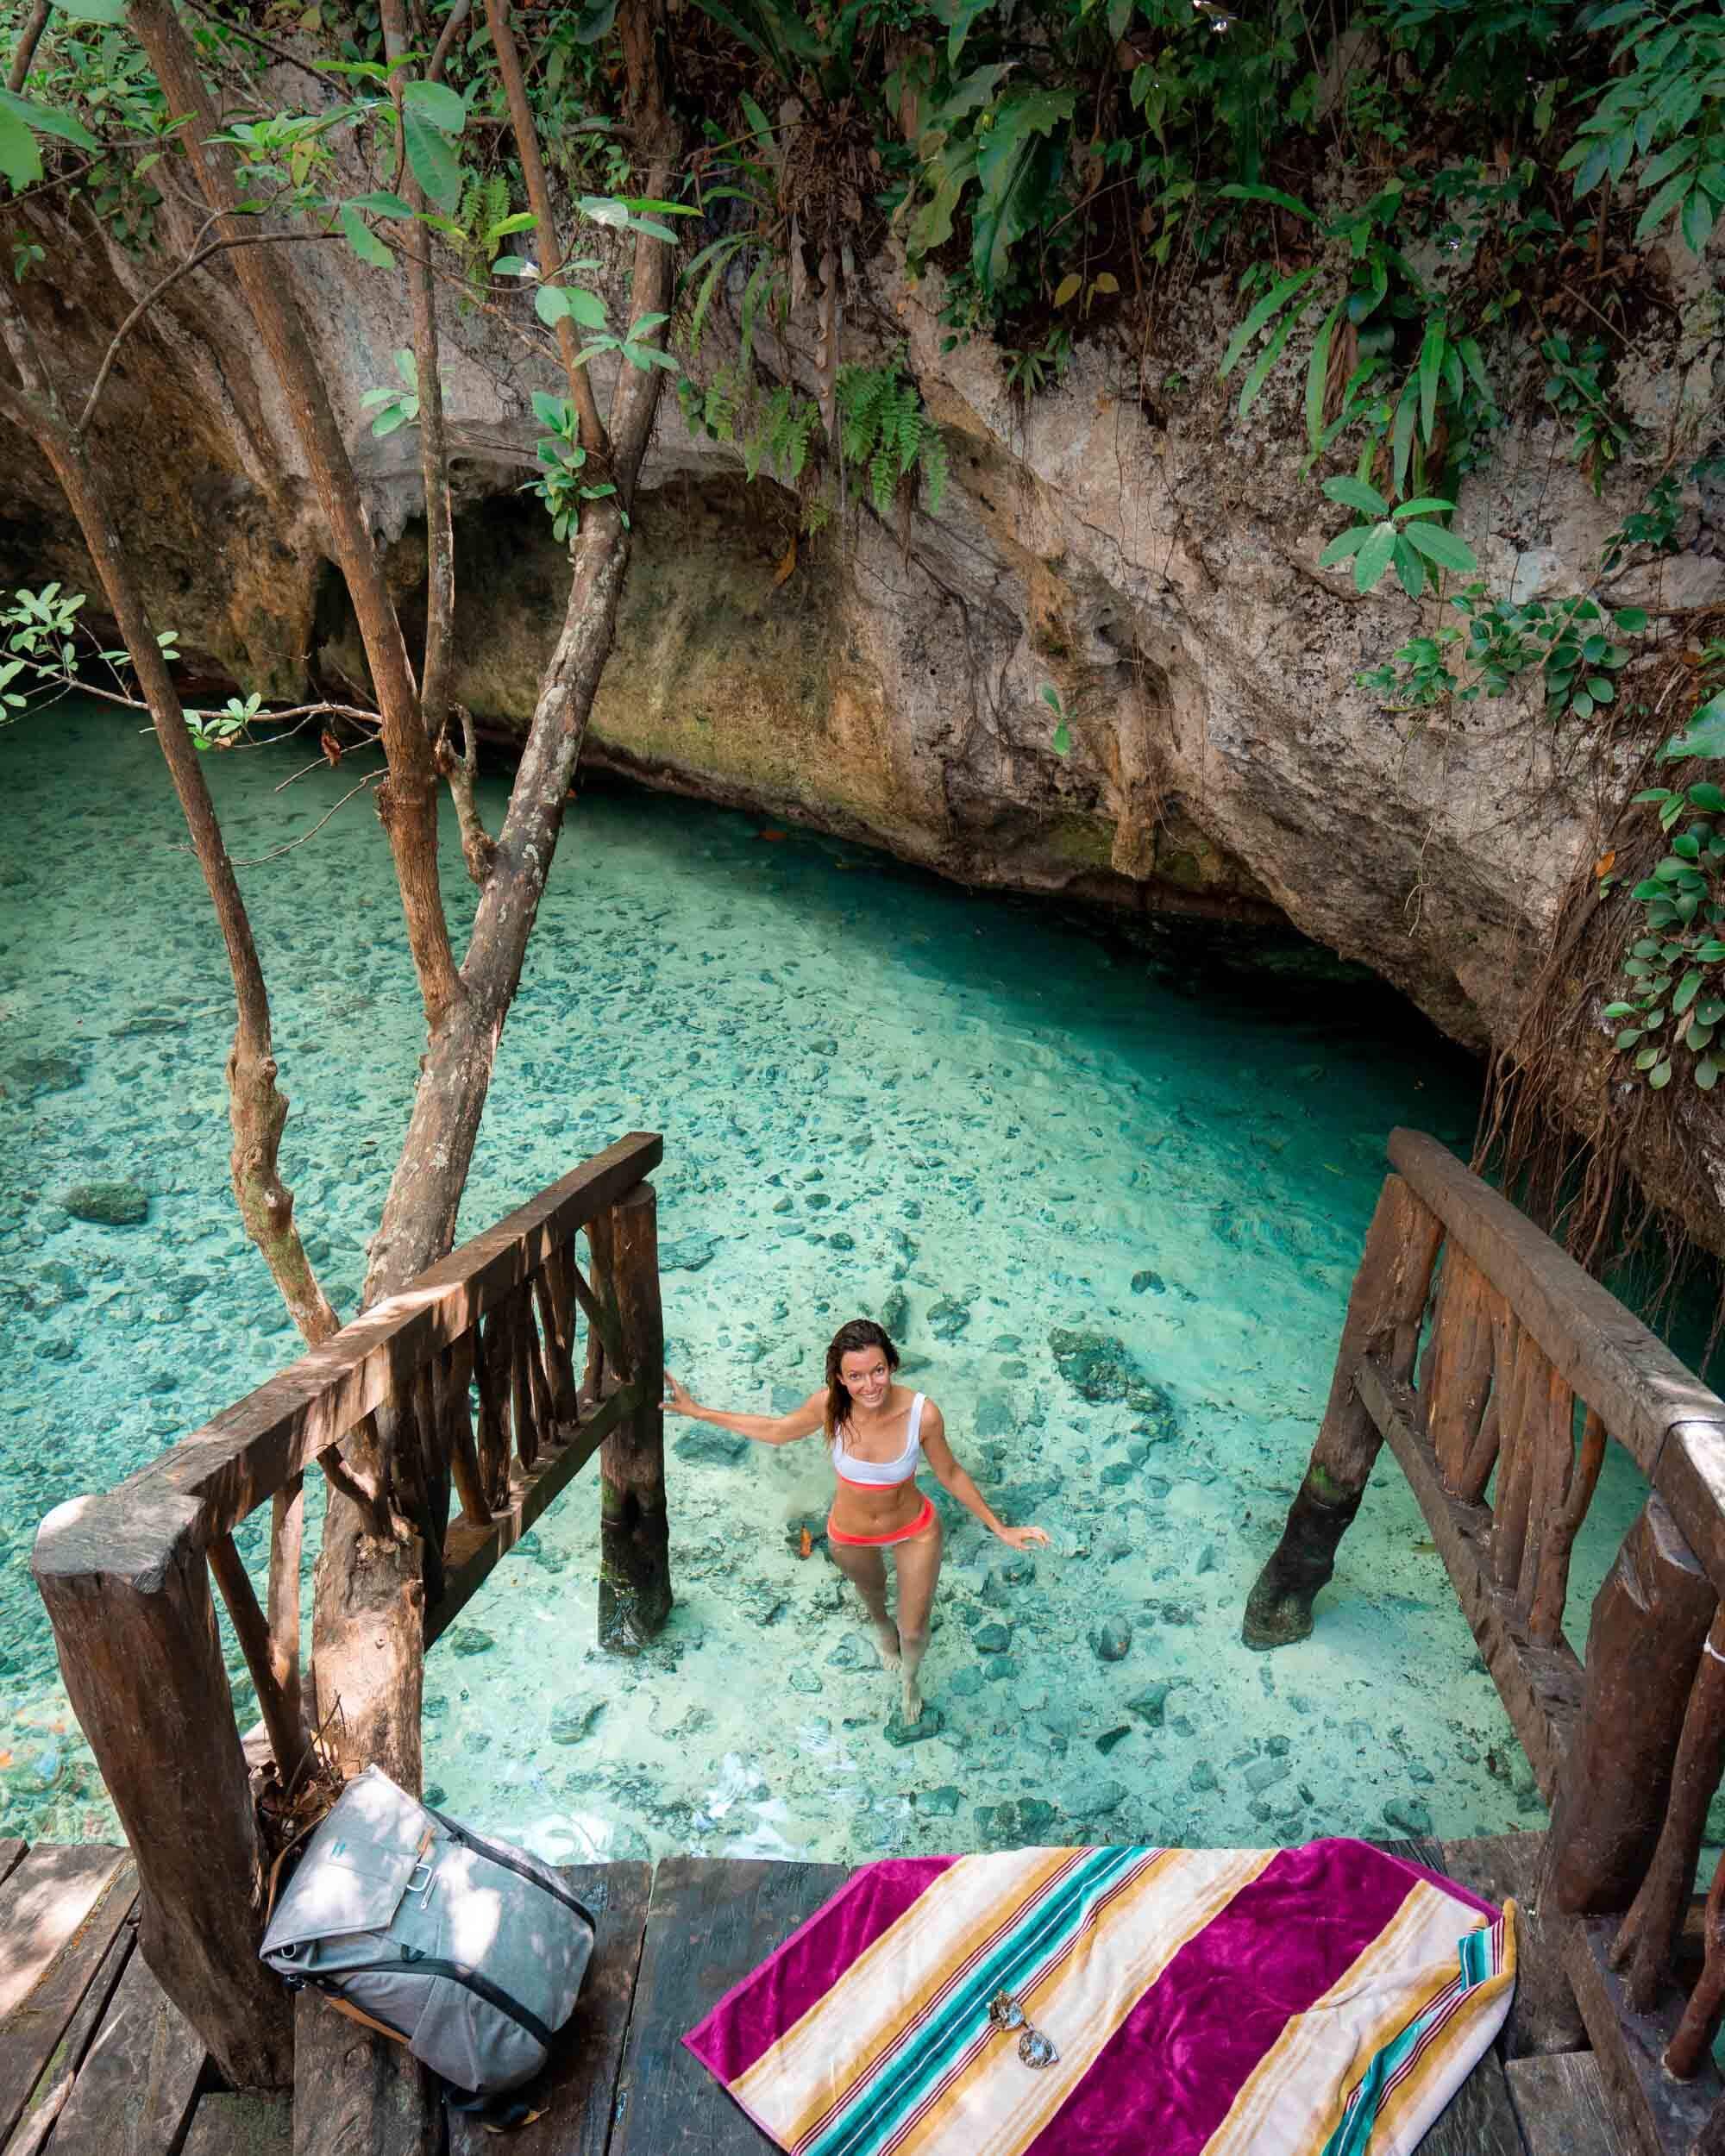 Grand Cenote is another popular cenote relatively close to Tulum. As a result it can also get very busy.